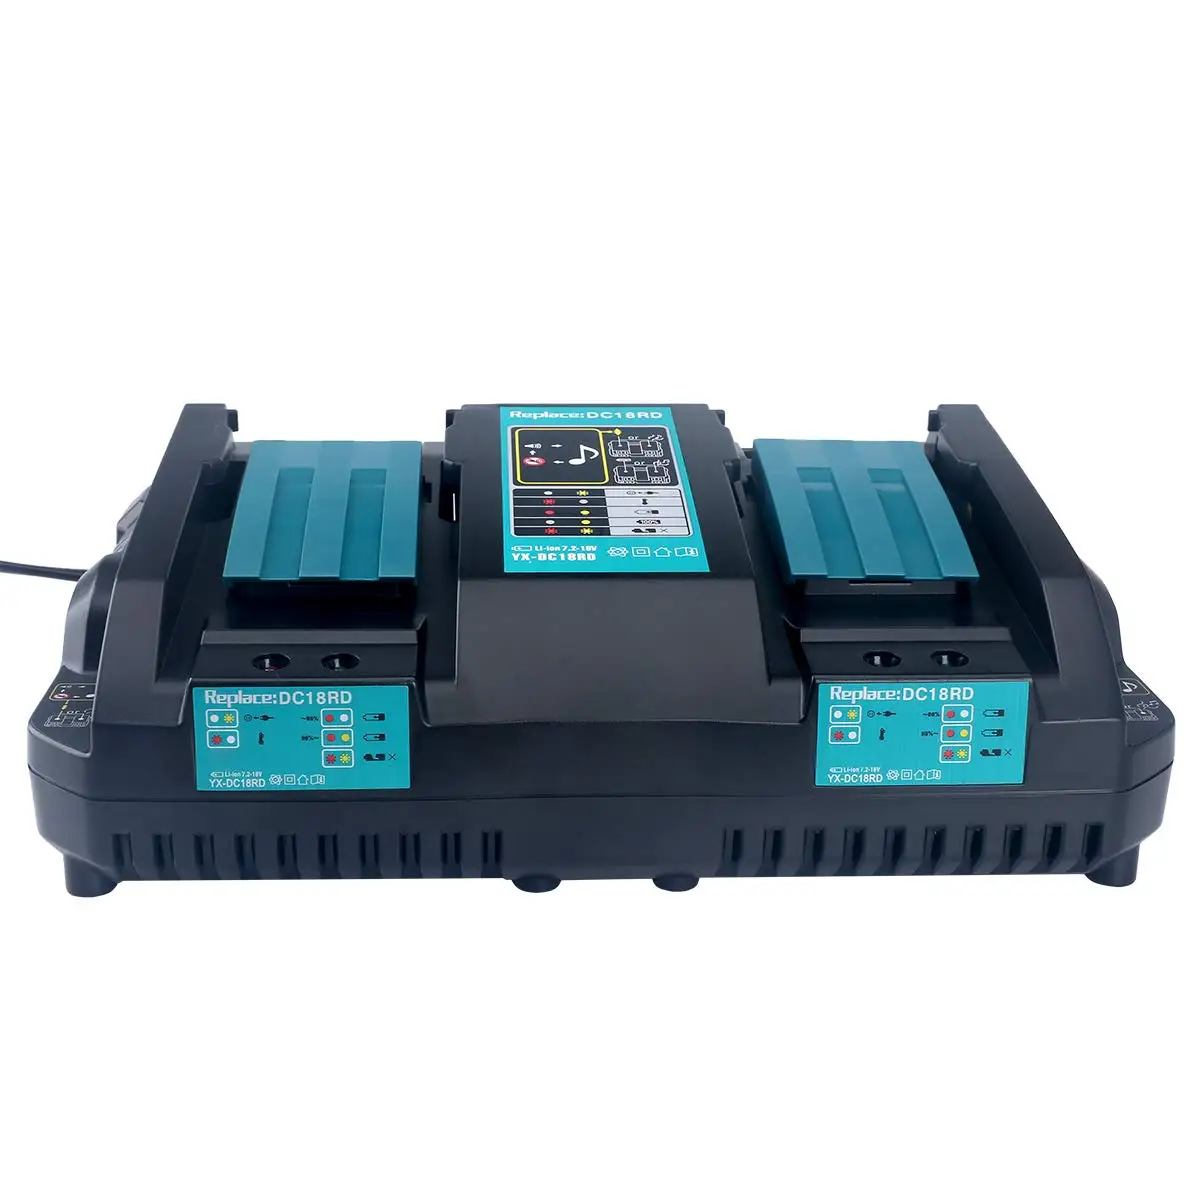 

18V Lithium-Ion Dual Port Charger DC18RD for MakitaS 18V Battery Charger DC18RC DC18RA DC18SF Compatible with Makita 14.4V 18V, Black